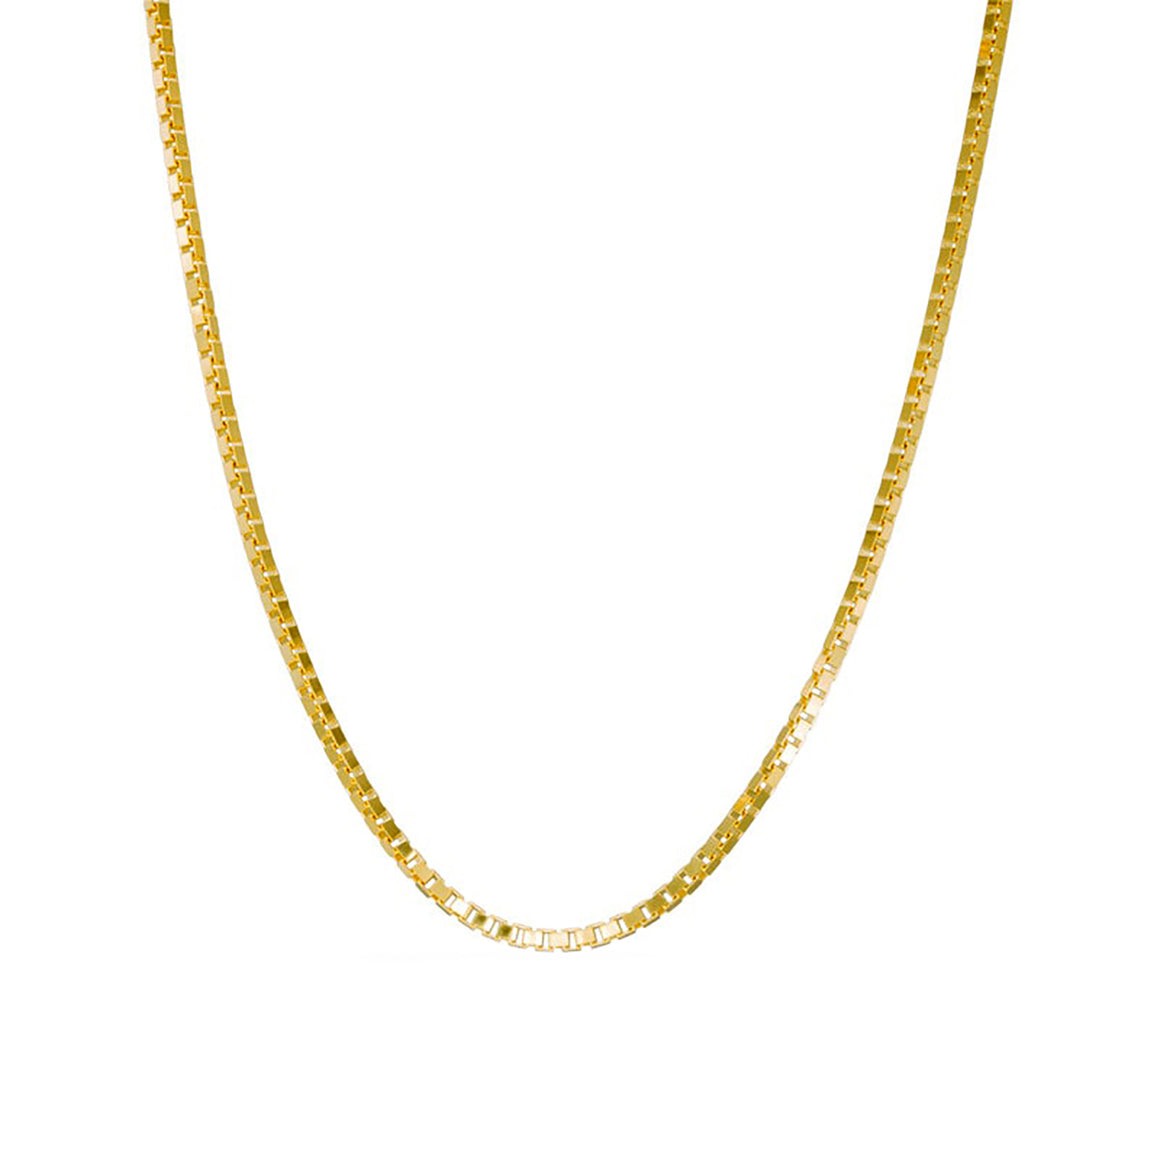 54 FLORAL 5mm BOX NECKLACE CHAIN - GOLD